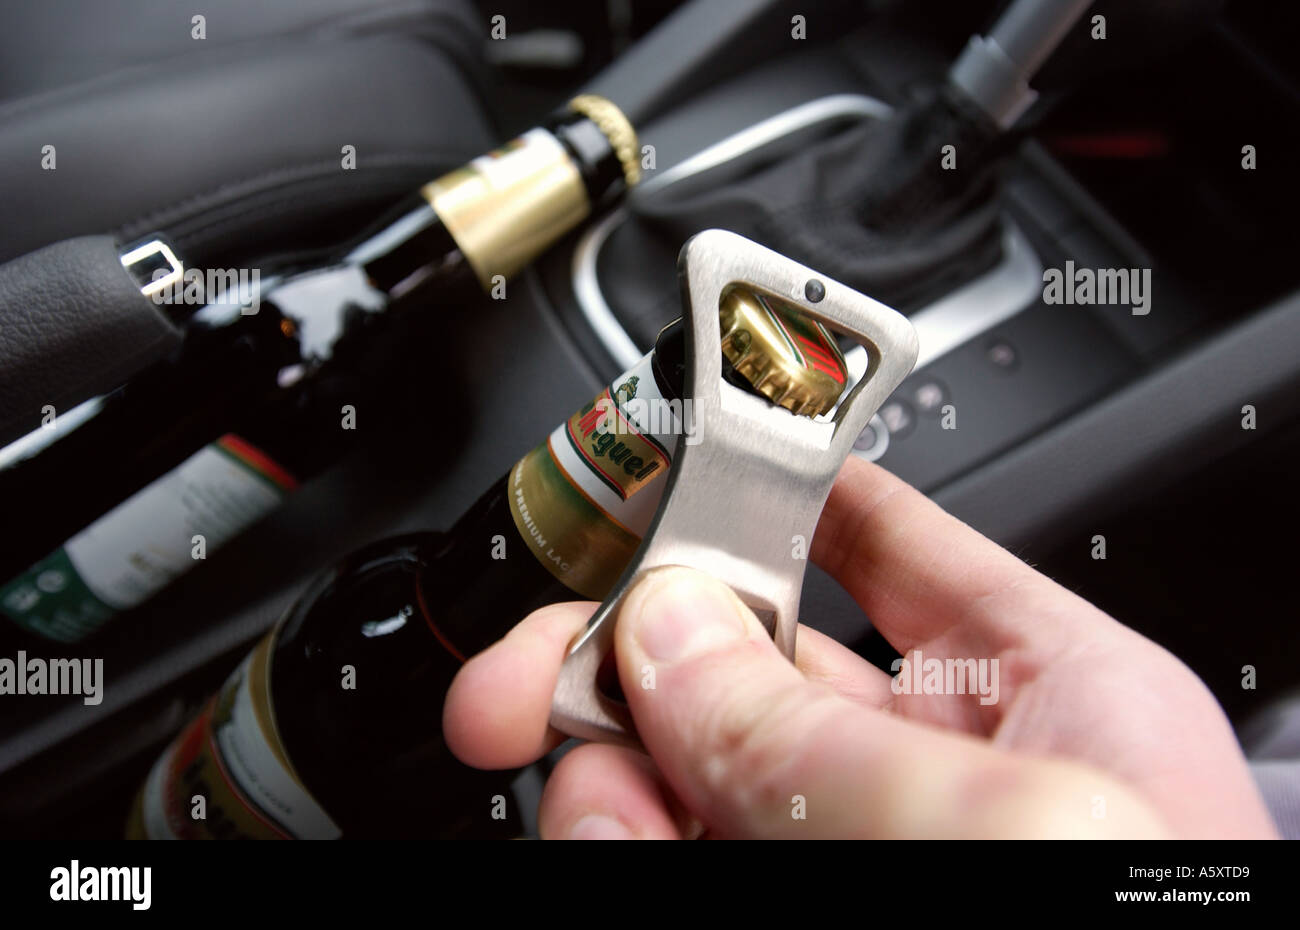 OPENING A BOTTLE OF BEER INSIDE A CAR Stock Photo